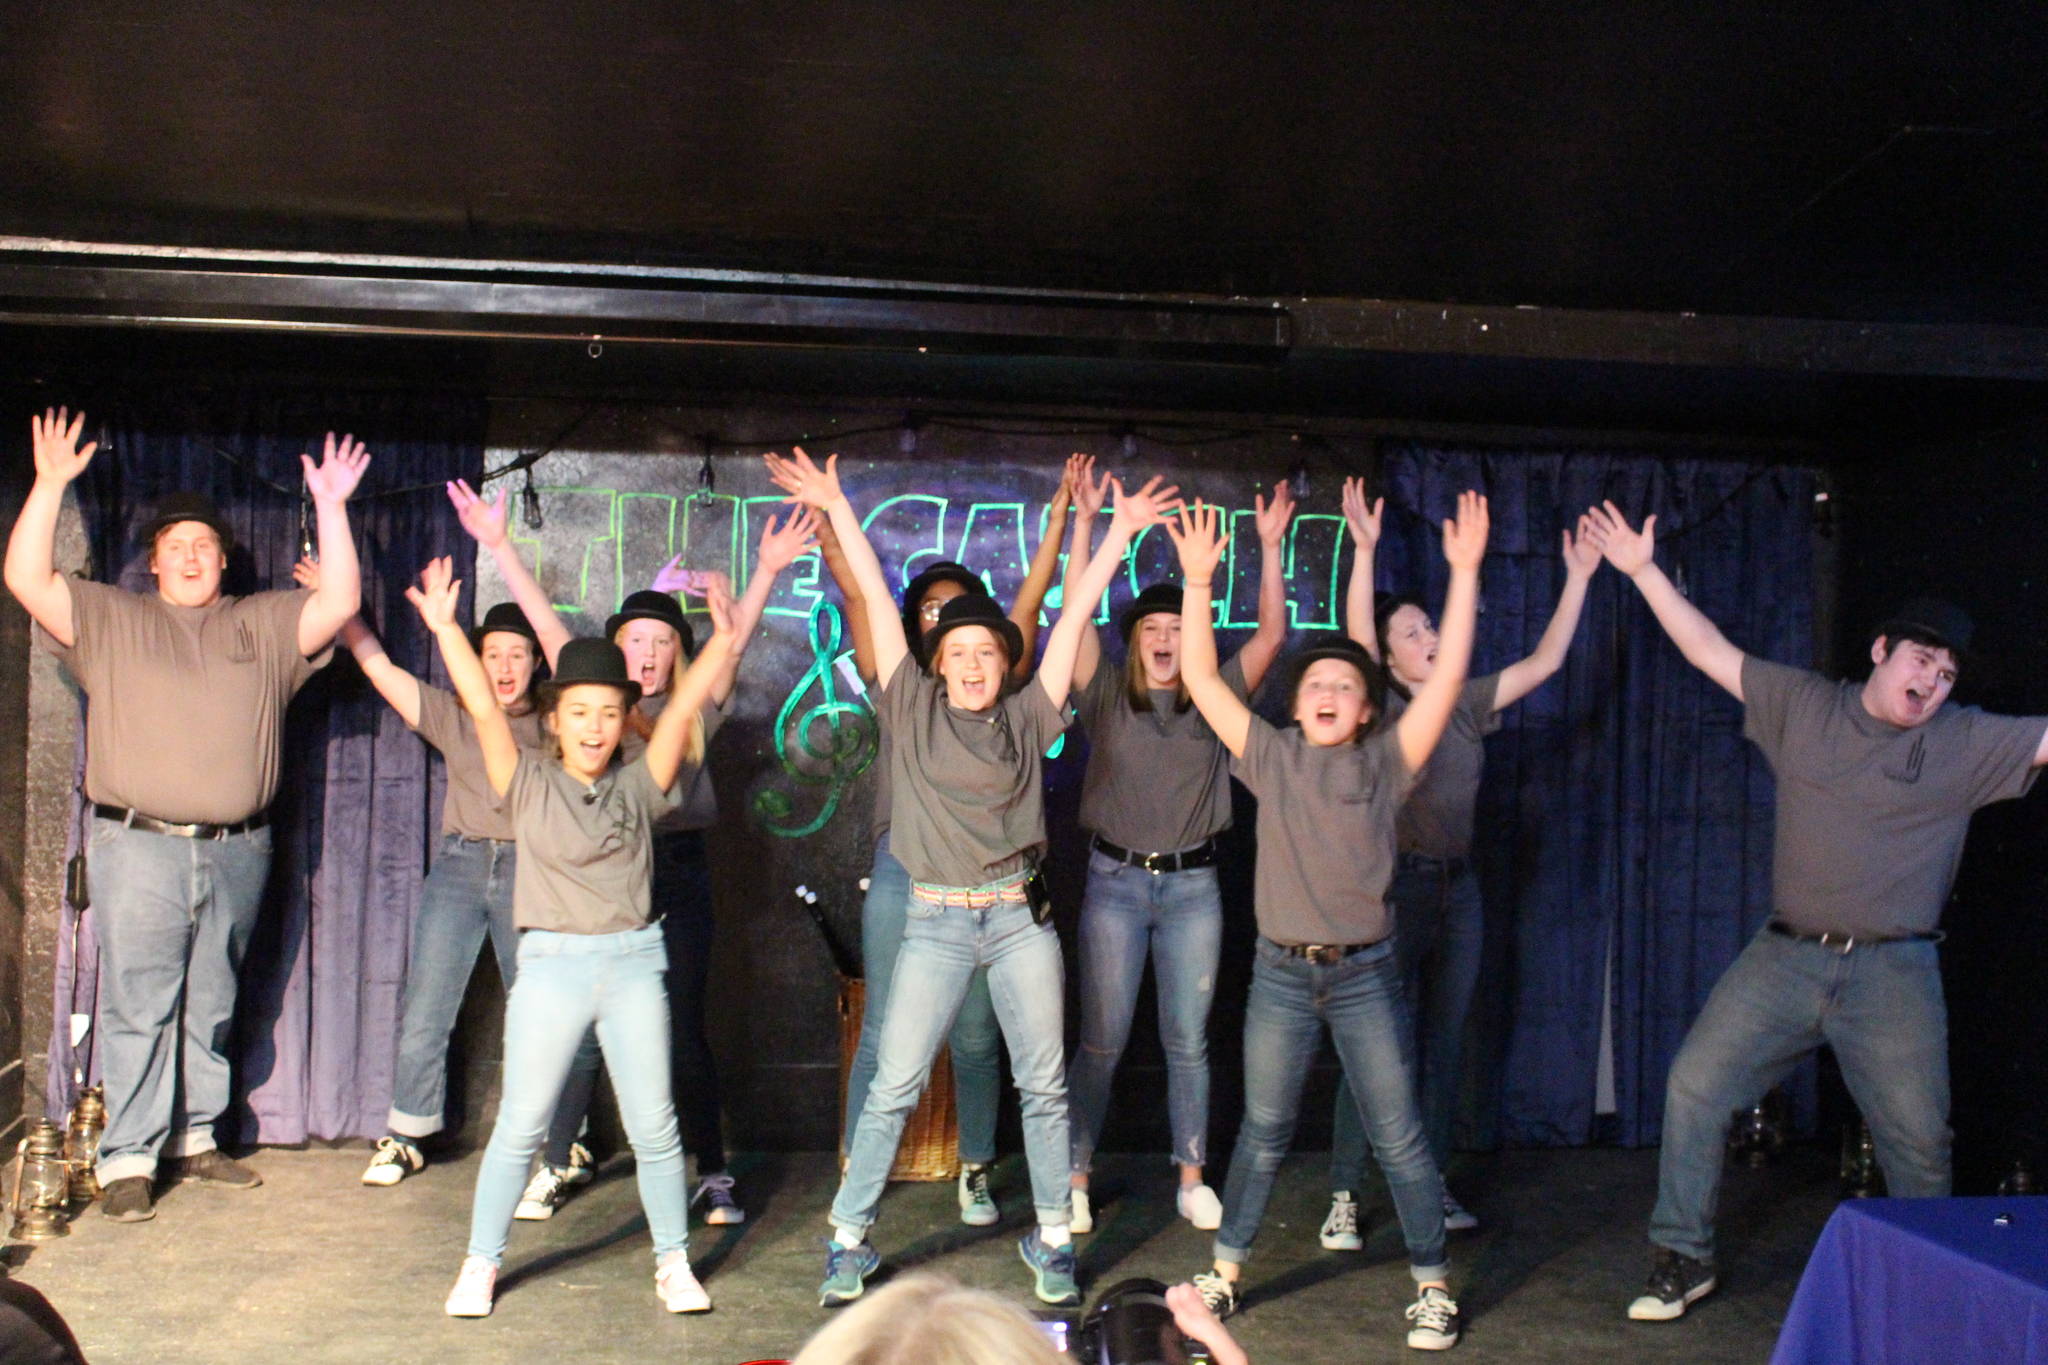 The Class Act Drama Troupe gives an intermission performance during the Spark Soldotna competition at the Catch Restaurant in Soldotna, Alaska, on Friday, Nov. 22, 2019. (Photo by Brian Mazurek/Peninsula Clarion)